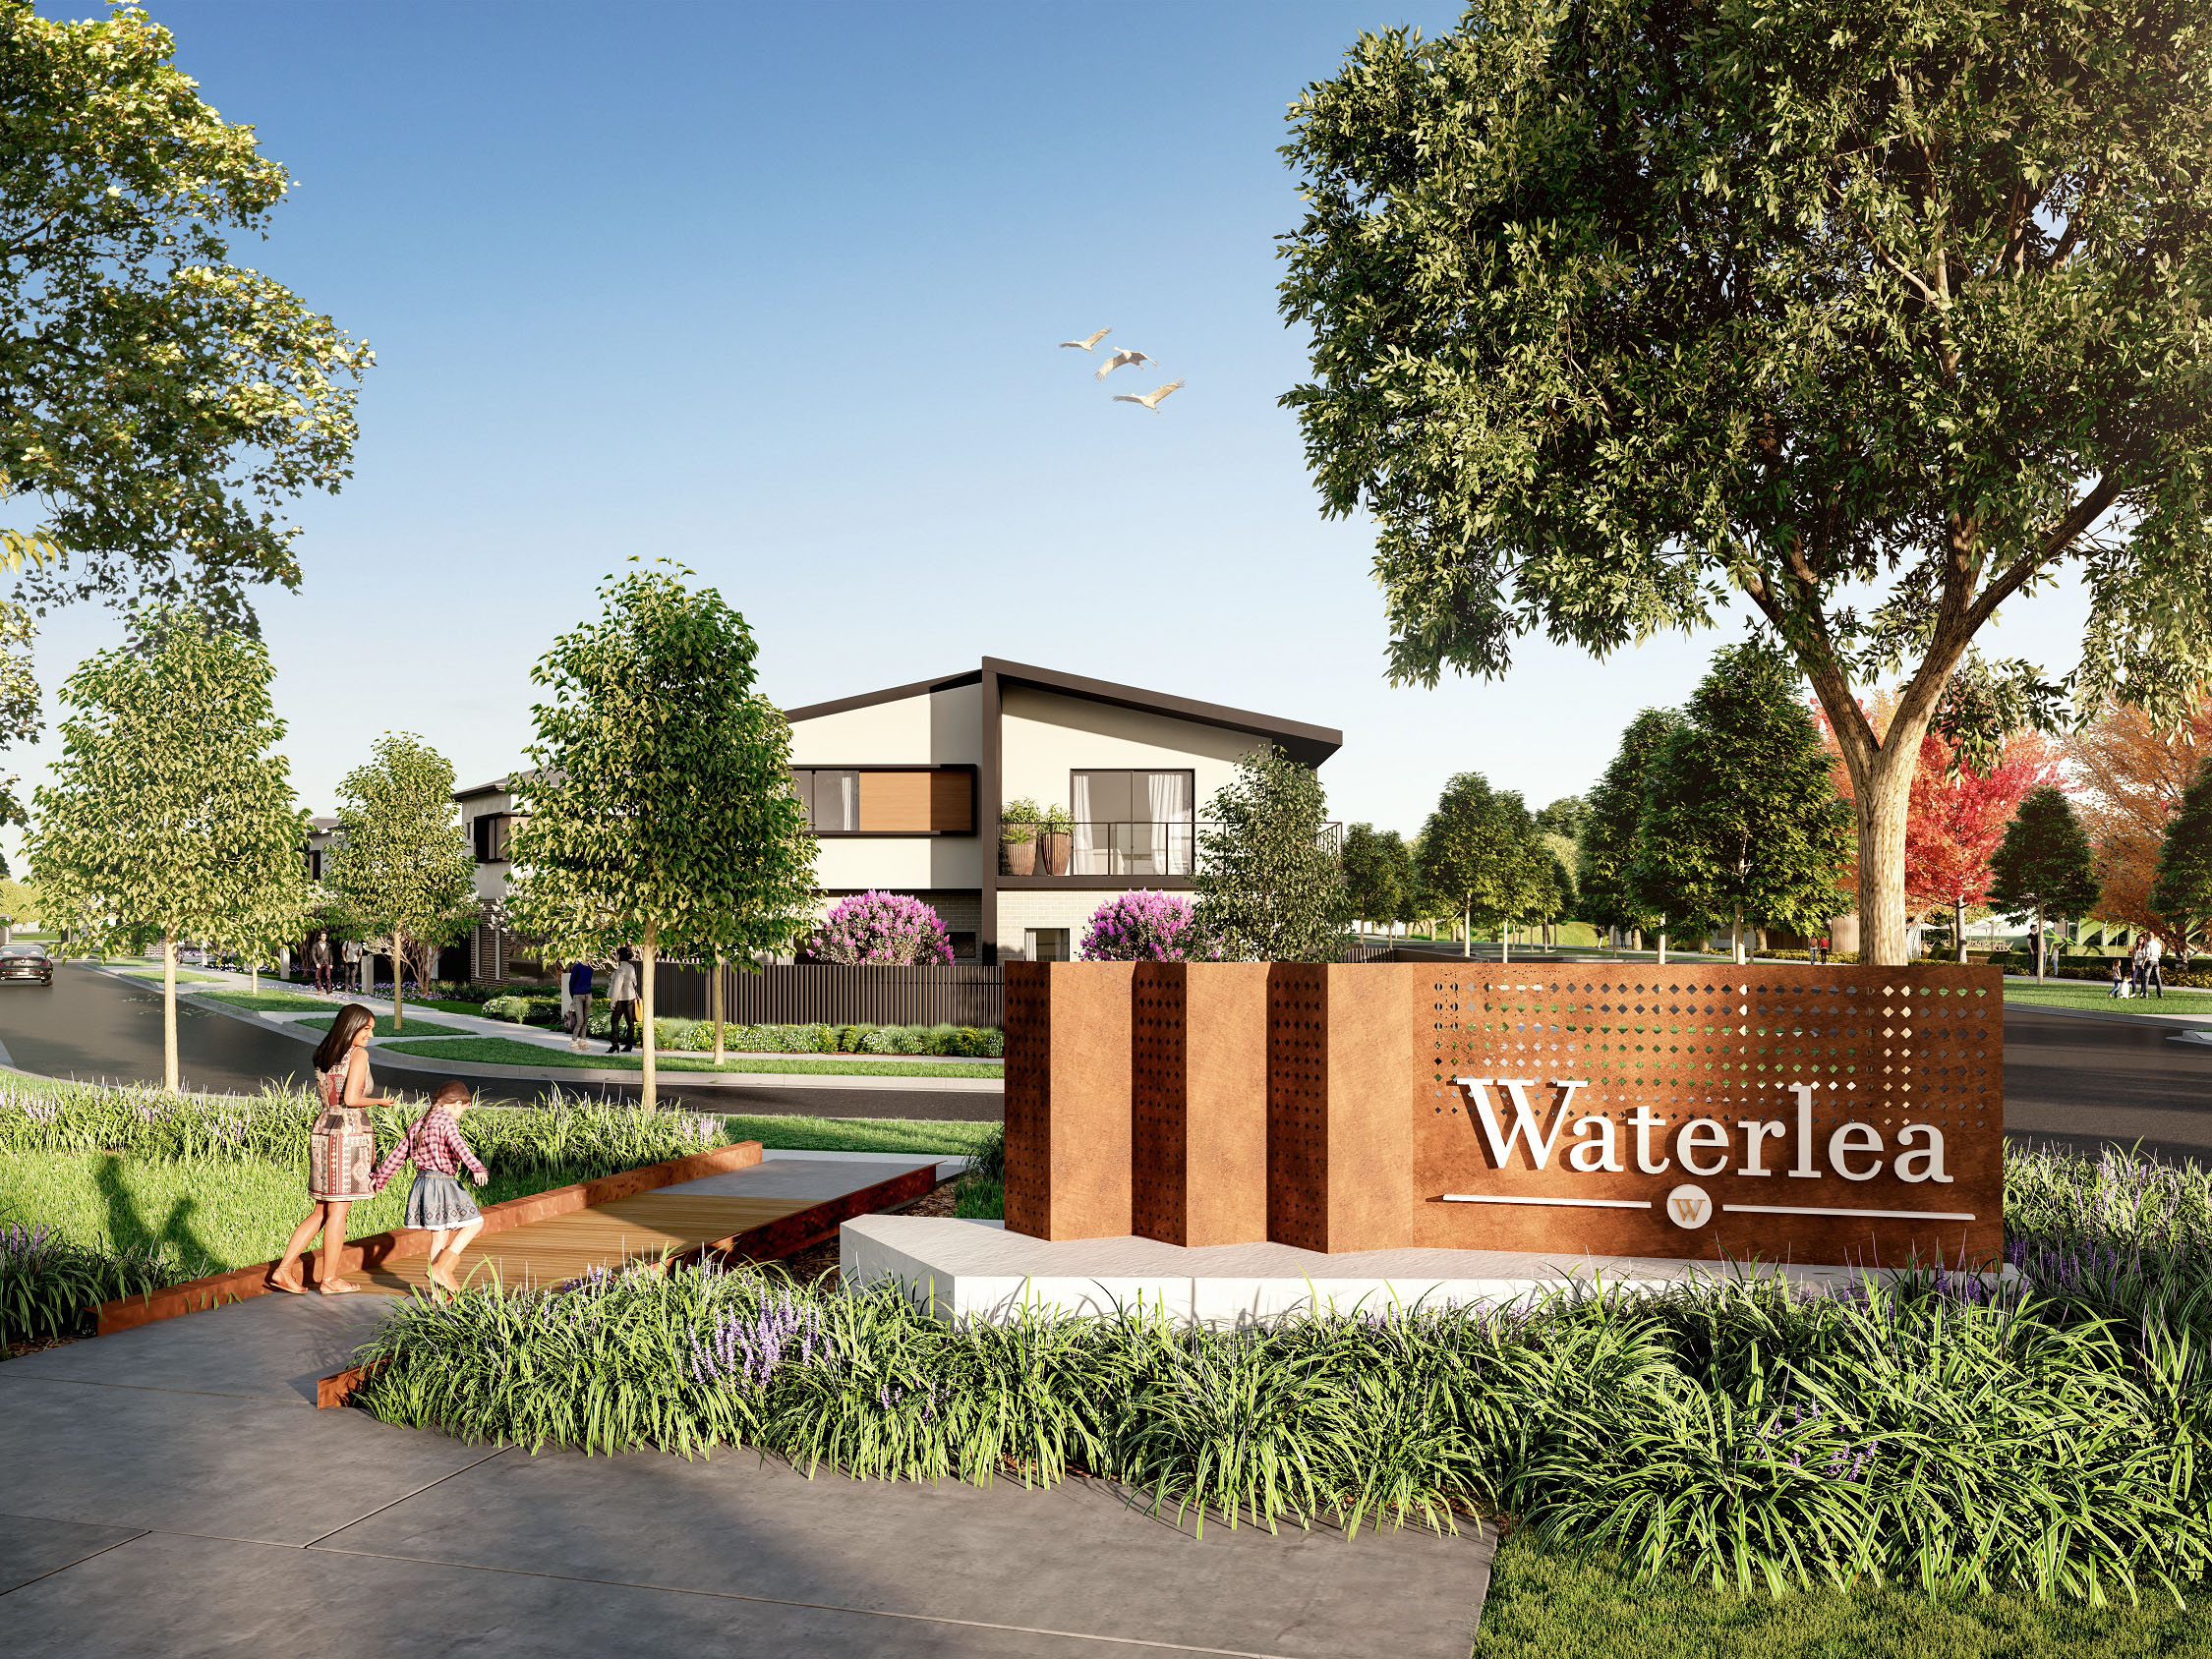 Stockland is lauding the start of construction of Waterlea, the latest sustainable community, that forms part of its growing medium density pipeline of more than 3,000 townhomes across the country. Iameg: Supplied
